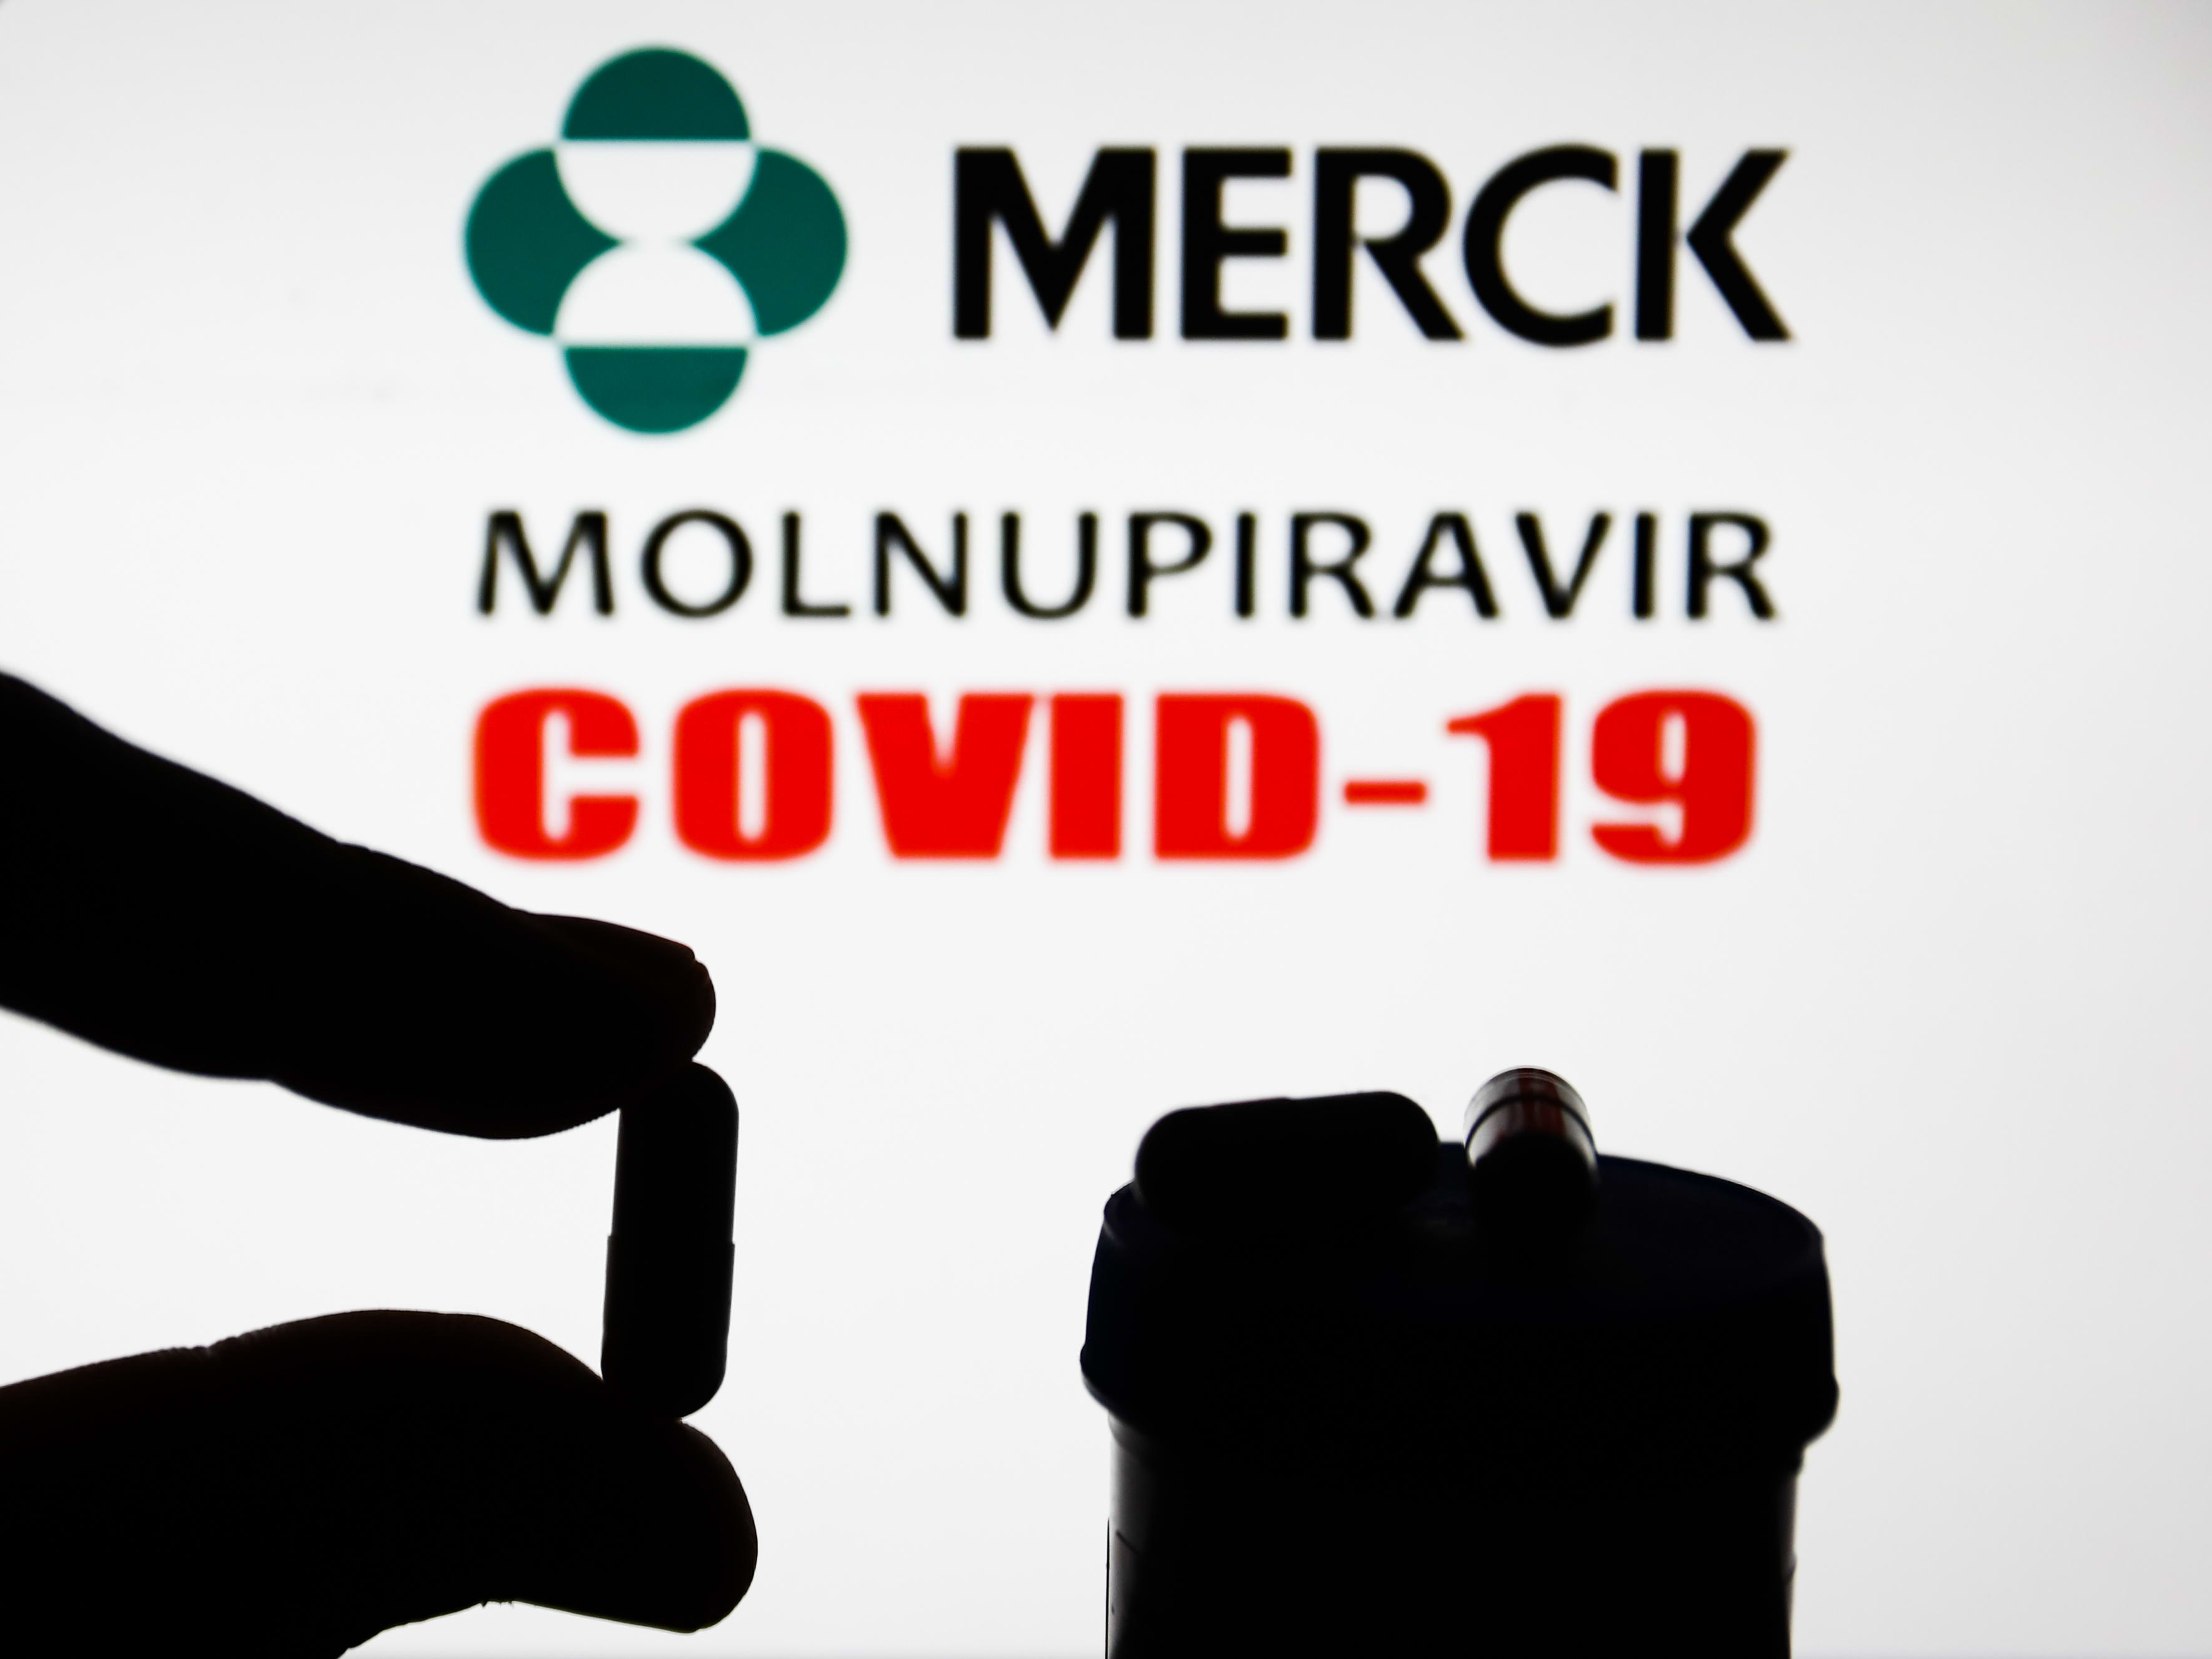 FDA advisory panel narrowly endorses Merck's oral Covid treatment pill, despite reduced efficacy and safety questions - CNBC